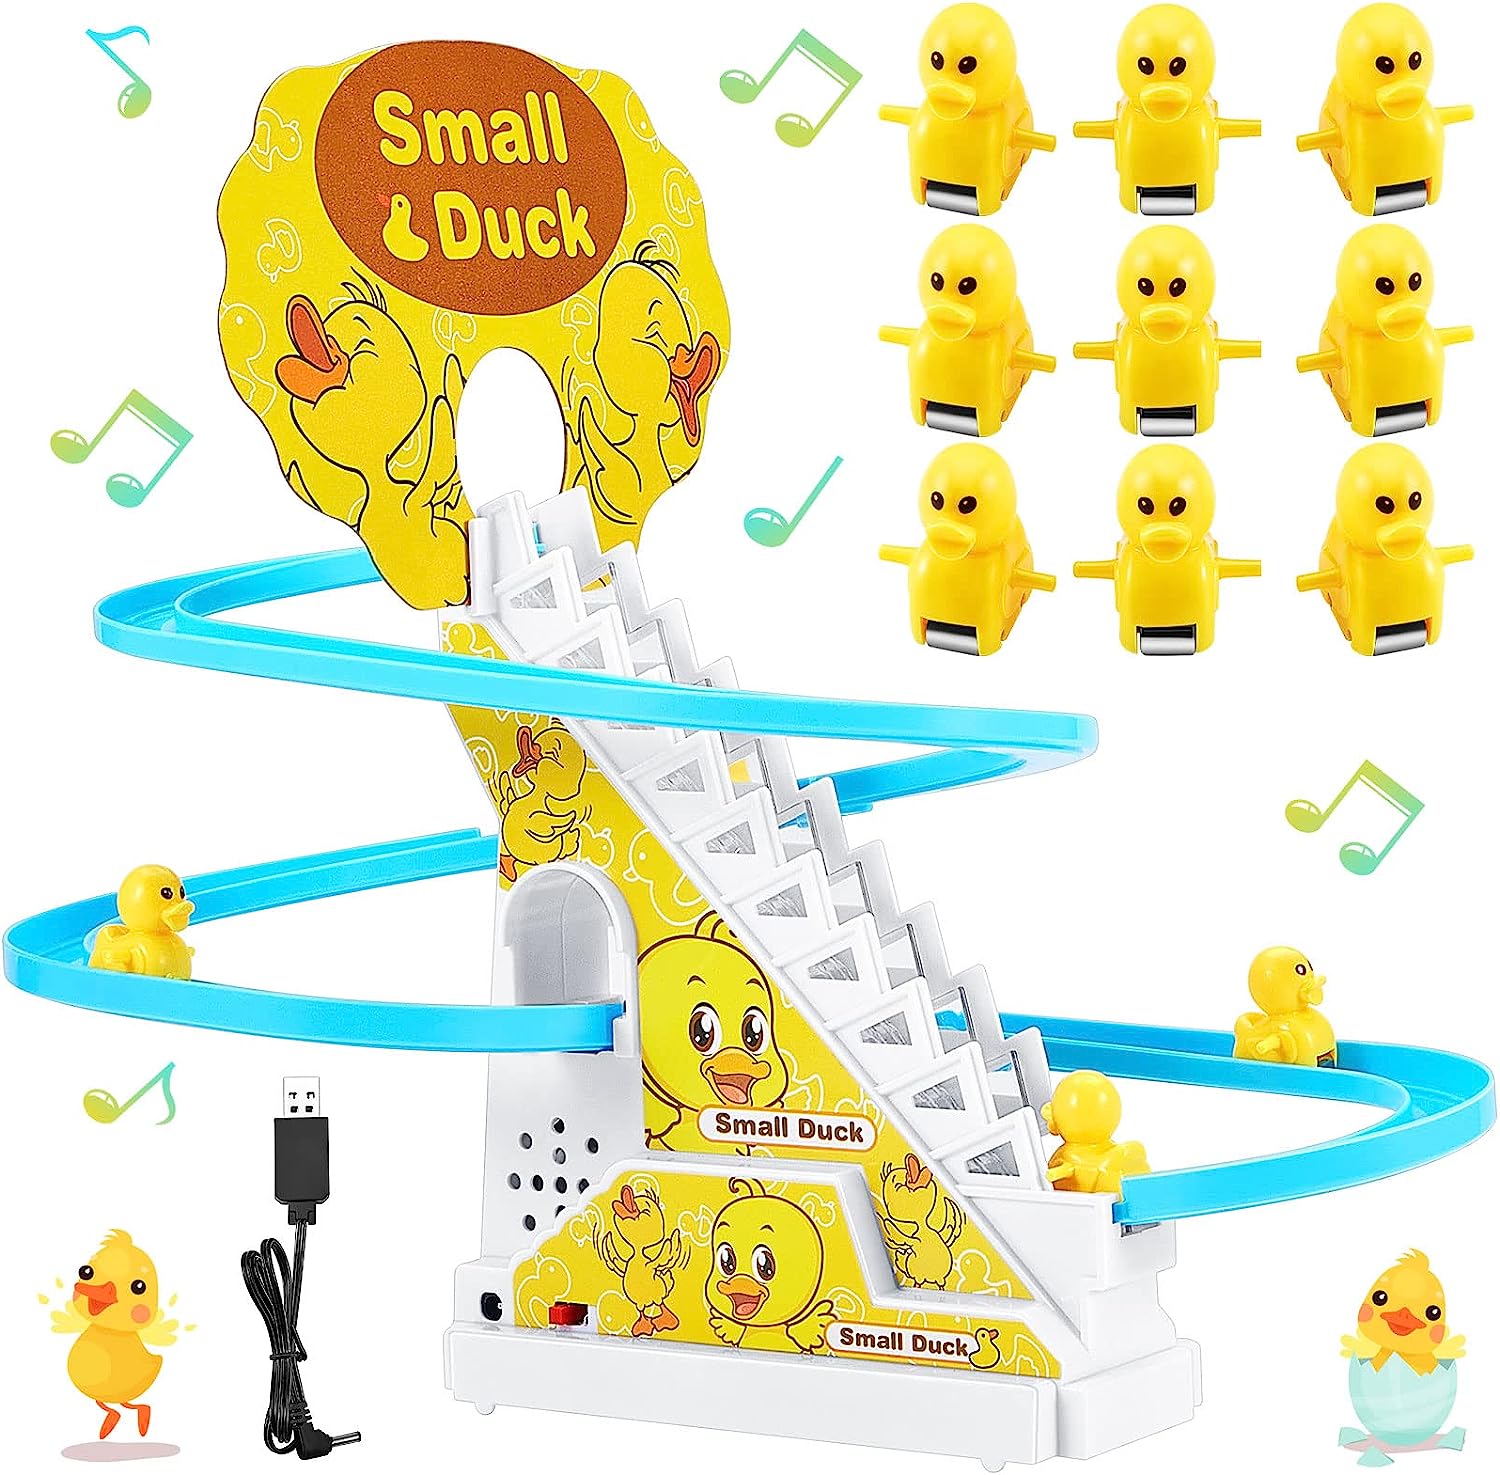 BrightRise Little Quackers Play Kit